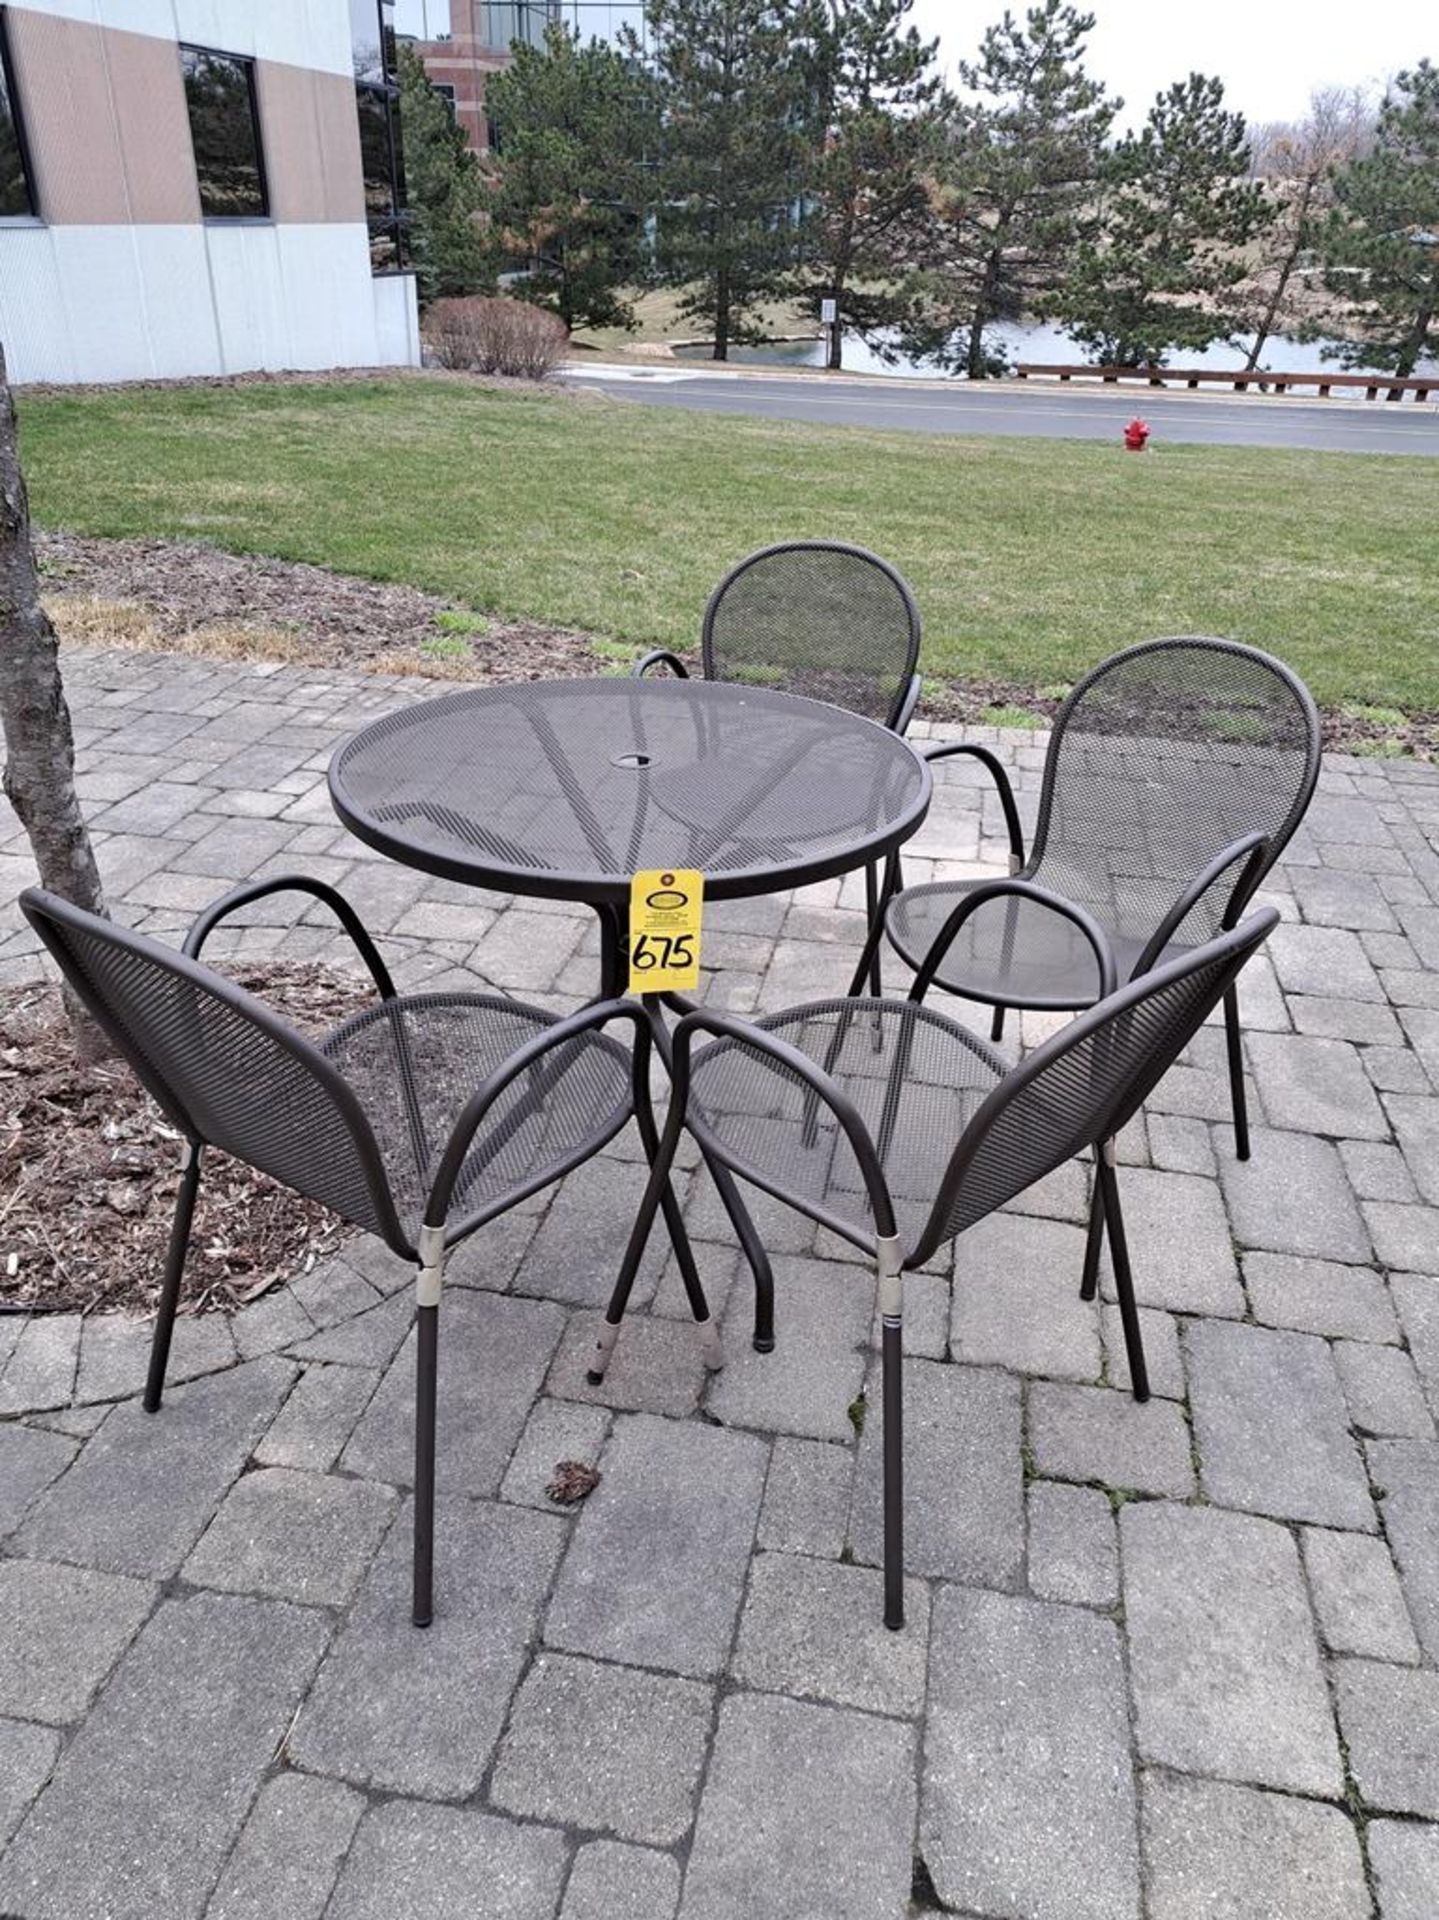 Lot (1) 31" Dia. Patio Table with (4) Chairs and Black Umbrella-Removal Is By Appointment Only-All